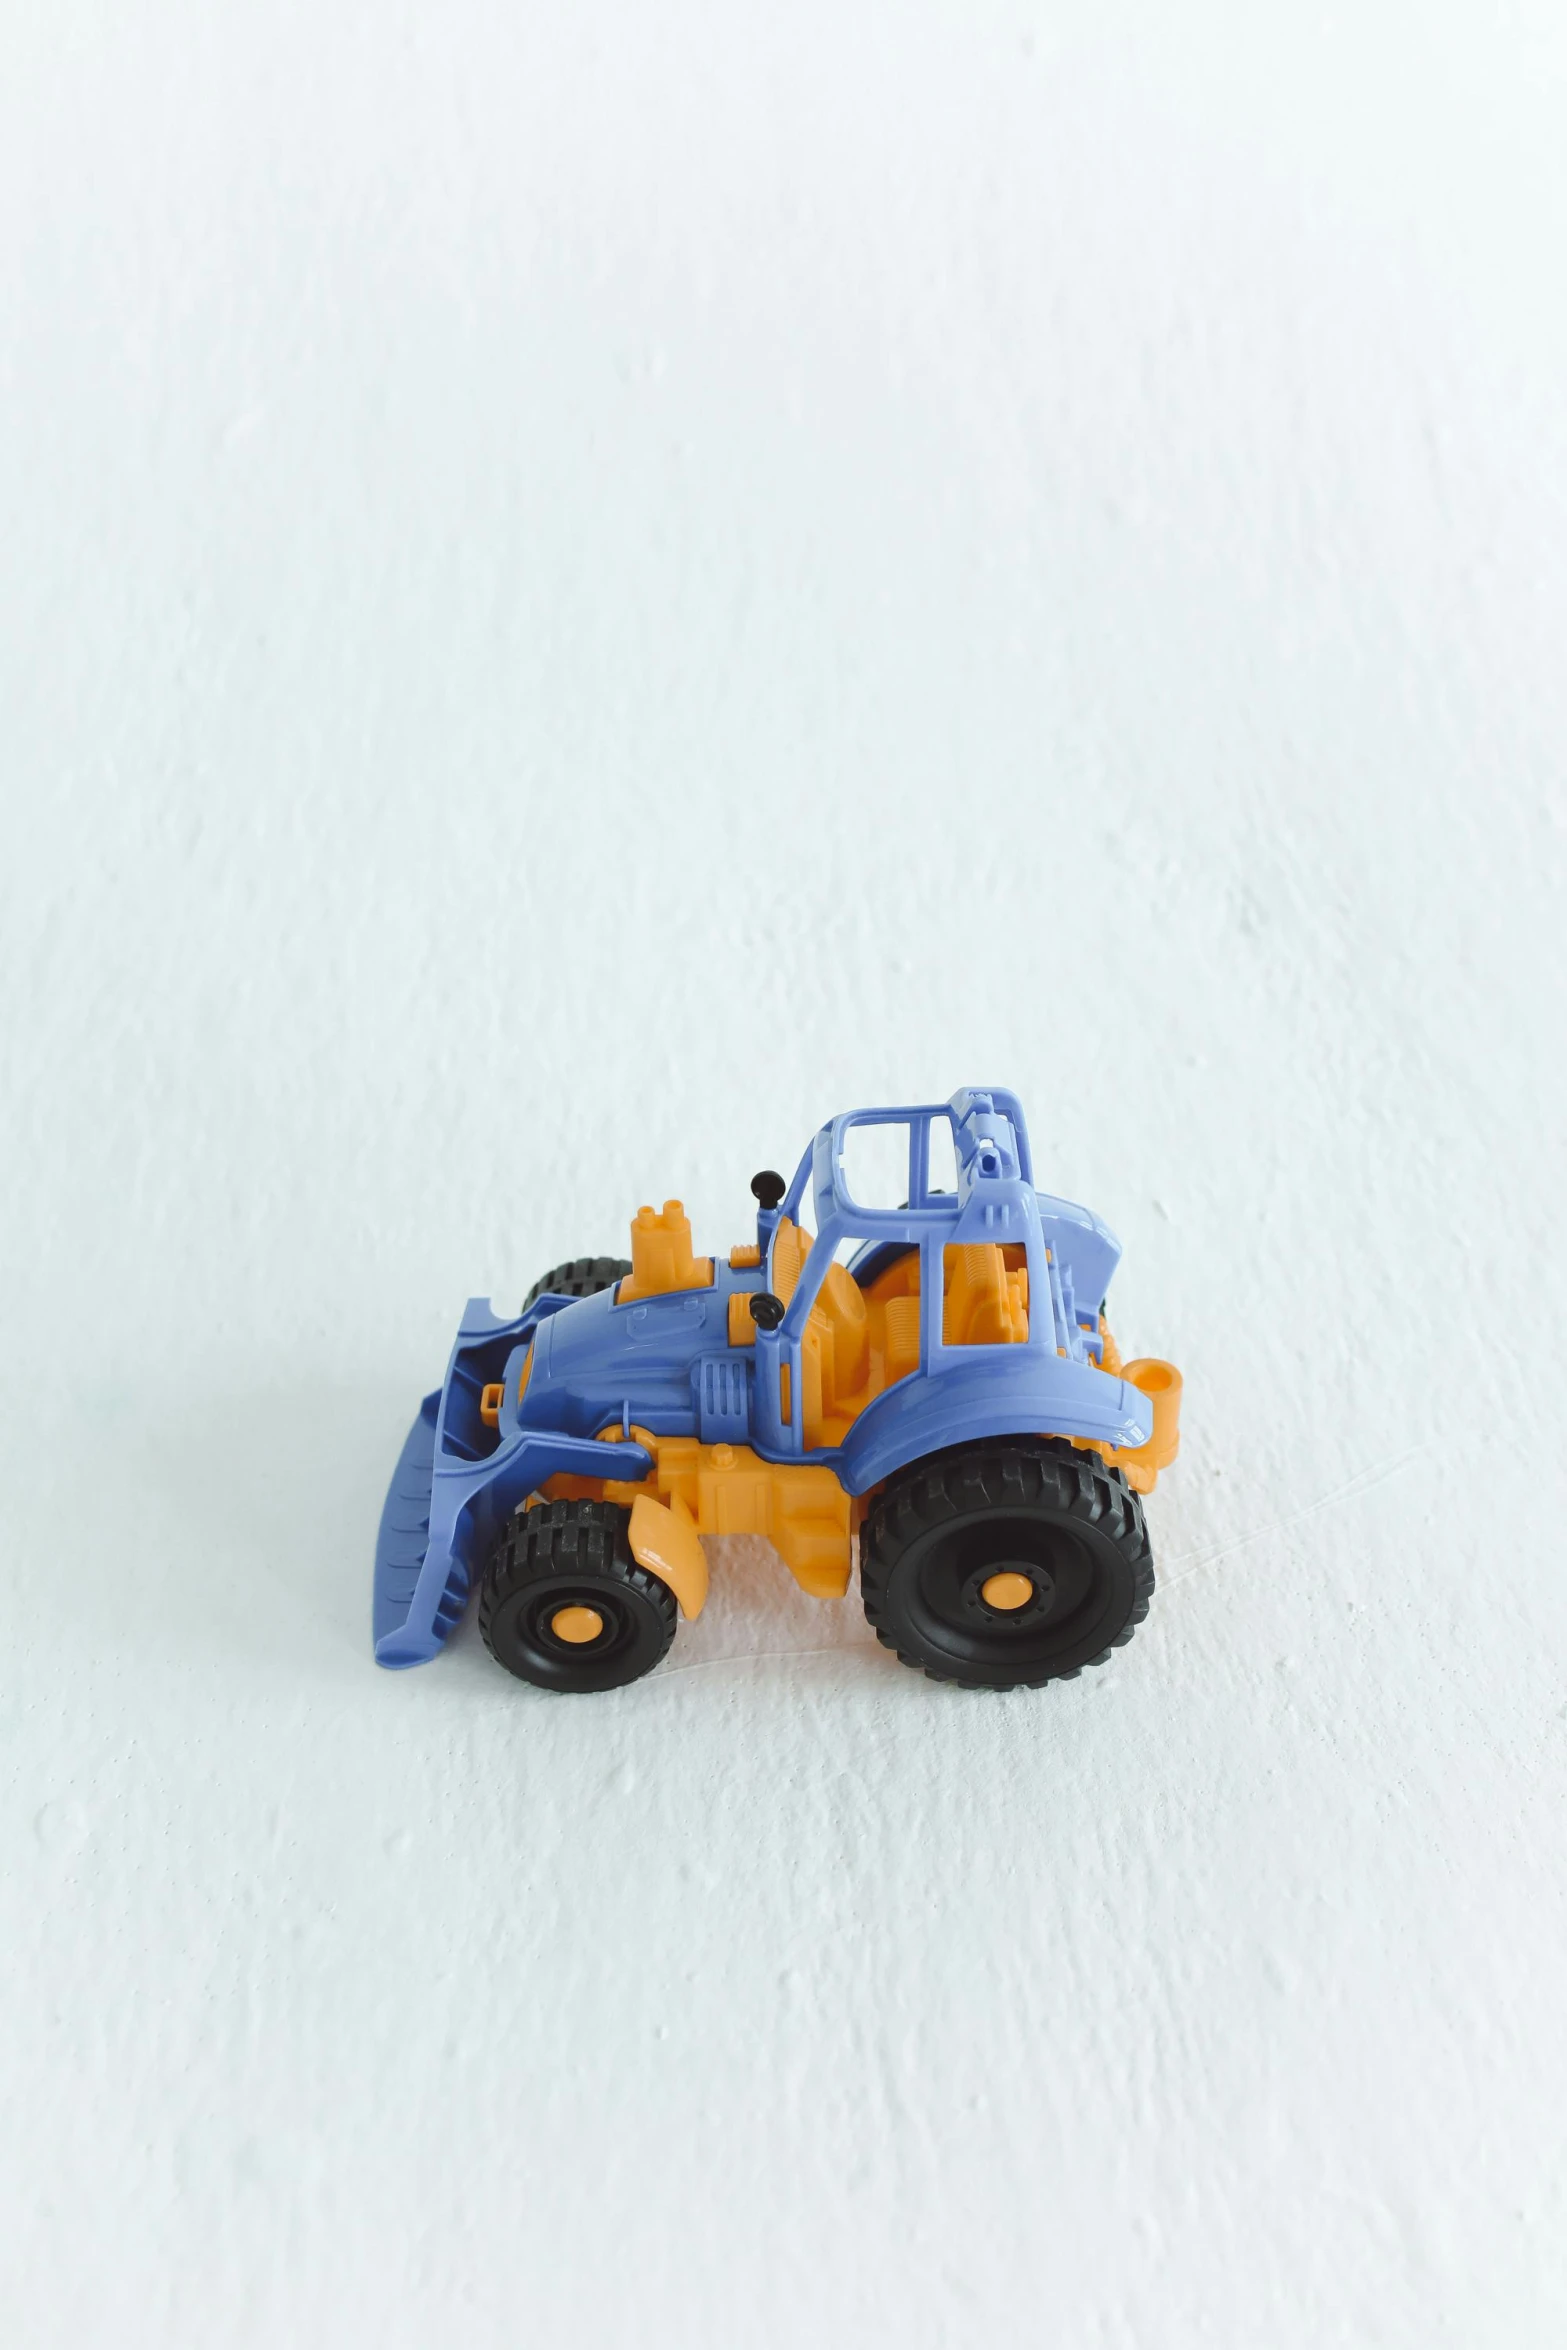 a close up of a toy tractor on a white surface, by Andries Stock, blue!! with orange details, environmental, 2 0 0 0 s, small